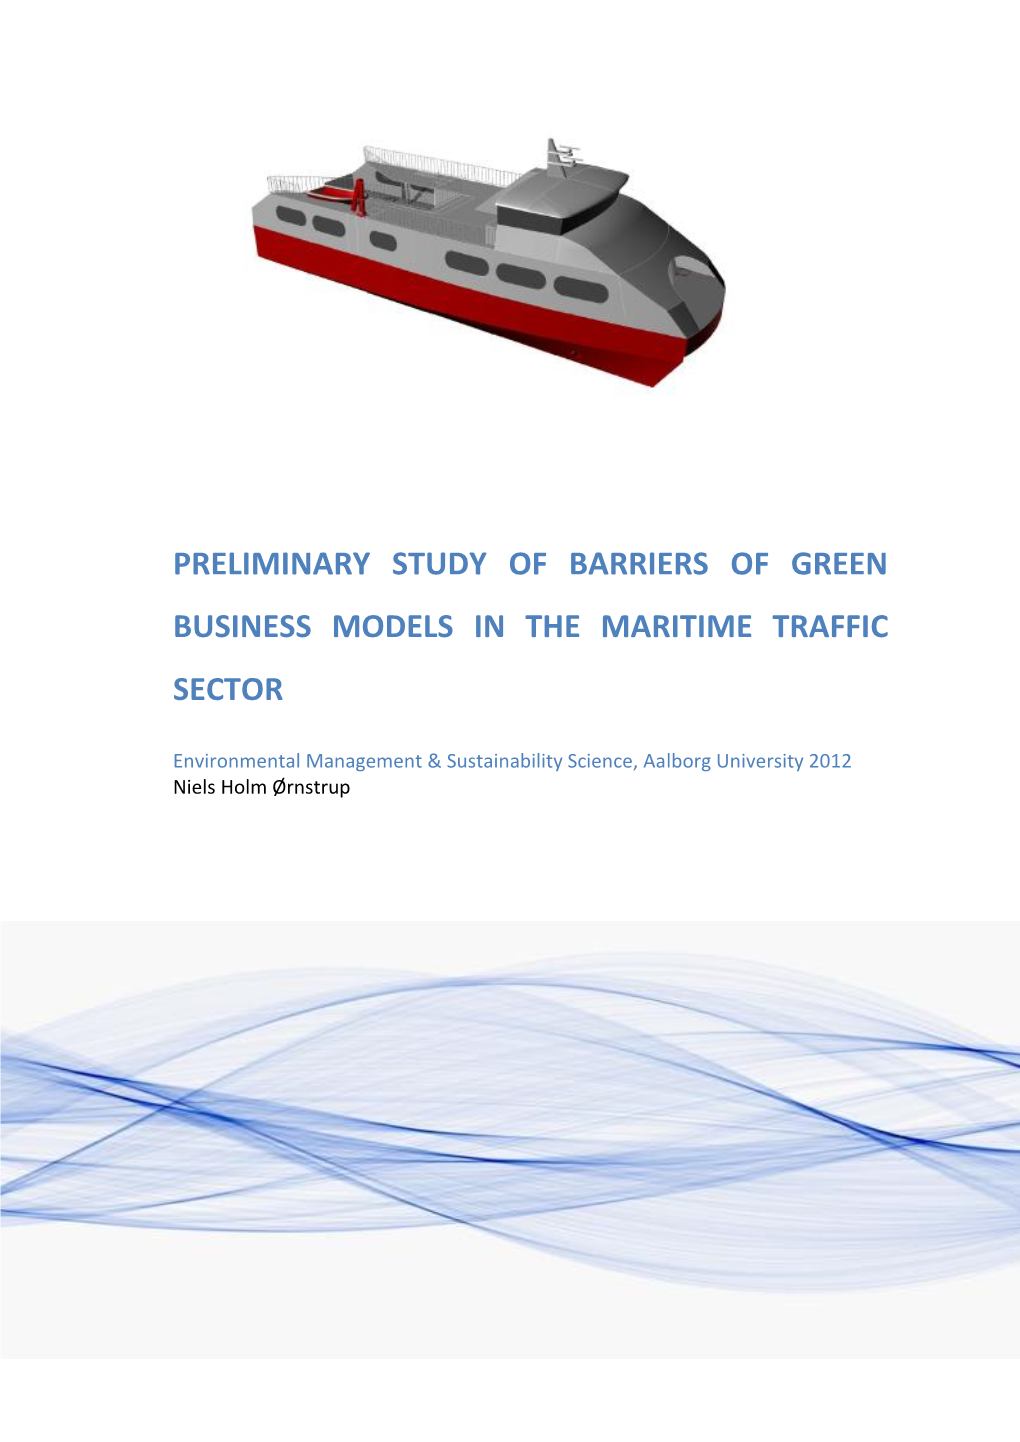 Preliminary Study of Barriers of Green Business Models in the Maritime Traffic Sector